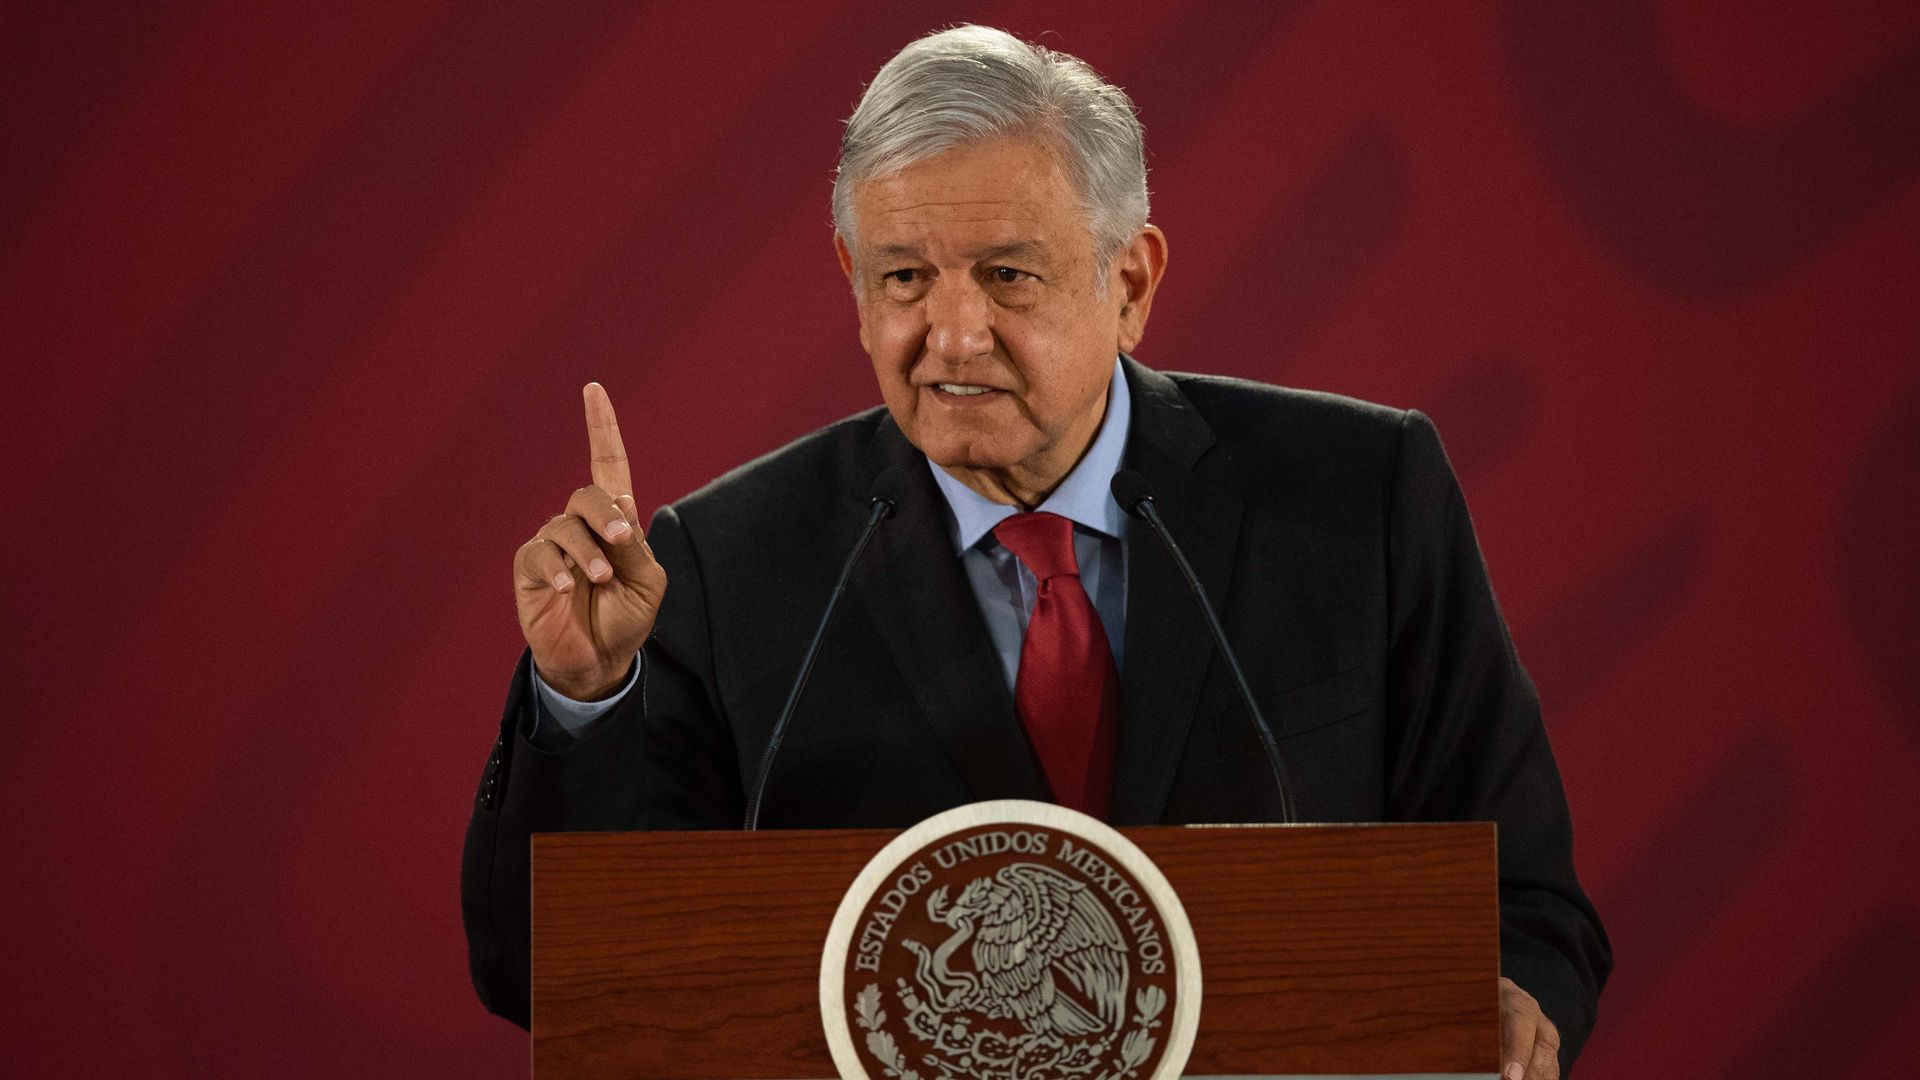 In this image, the Mexican president stands and speaks behind a podium.